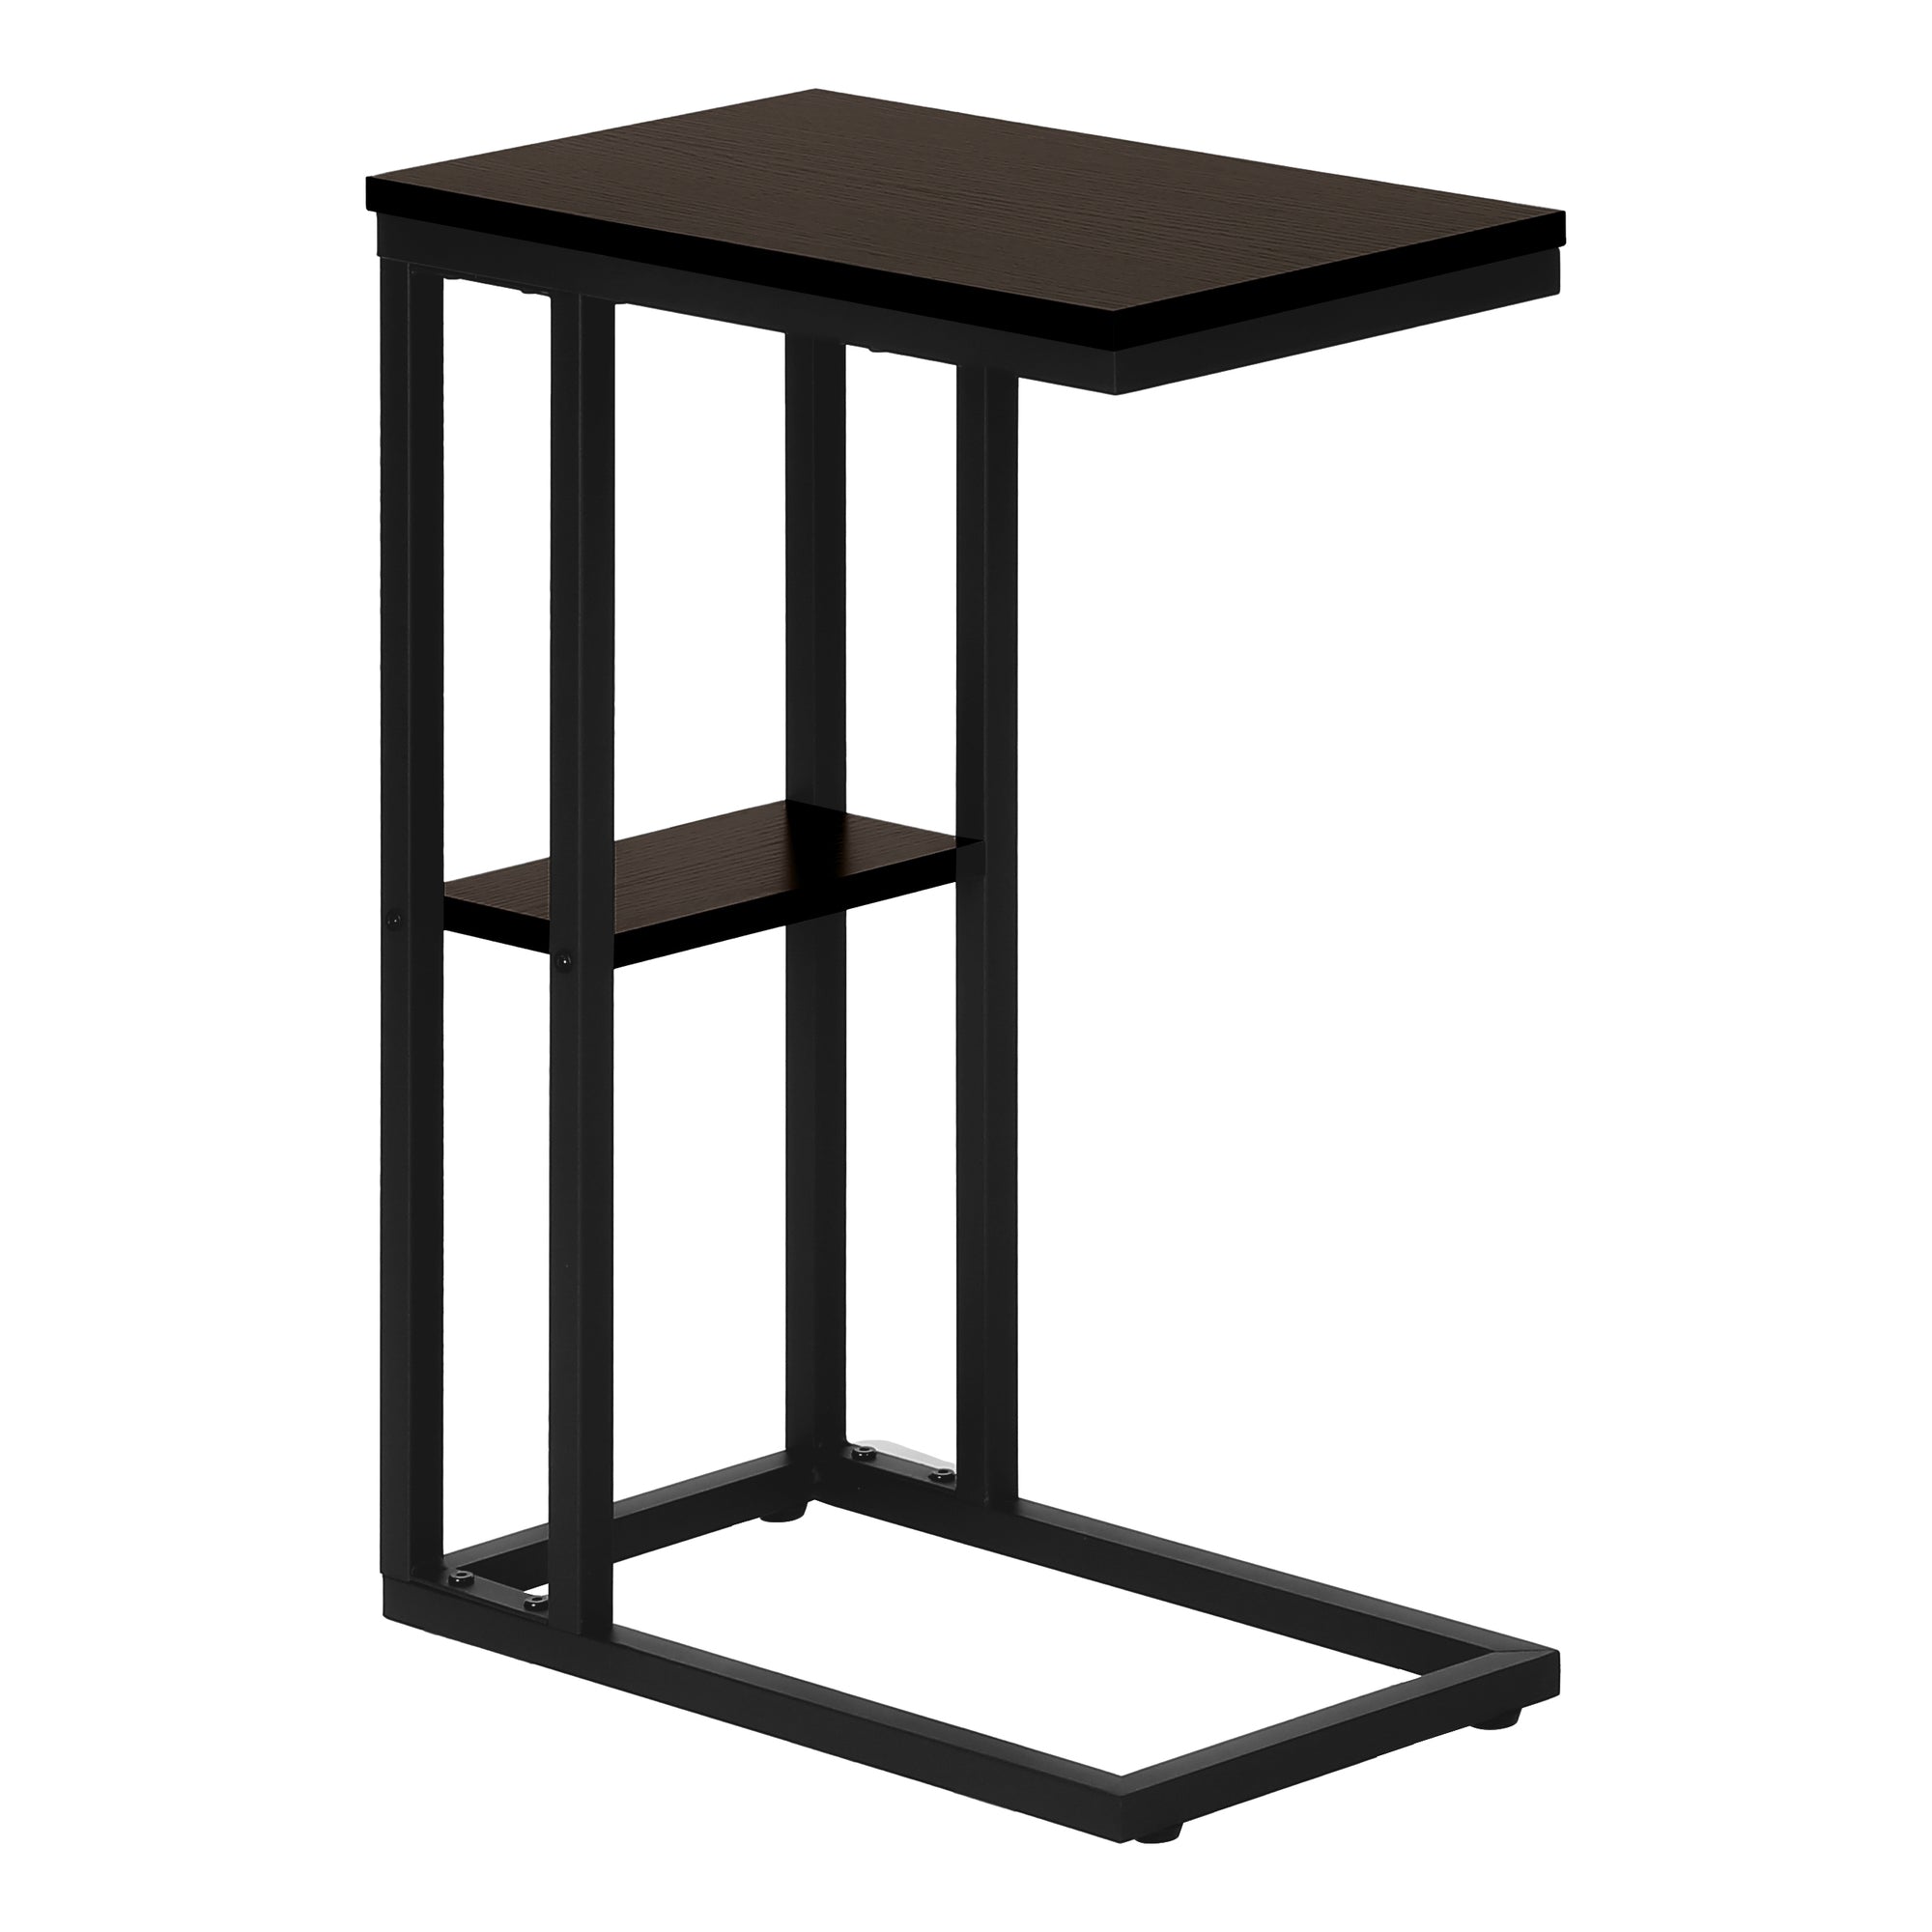 MN-163670    Accent Table, C-Shaped, End, Side, Snack, Living Room, Bedroom, Metal Legs, Laminate, Espresso, Black, Contemporary, Modern